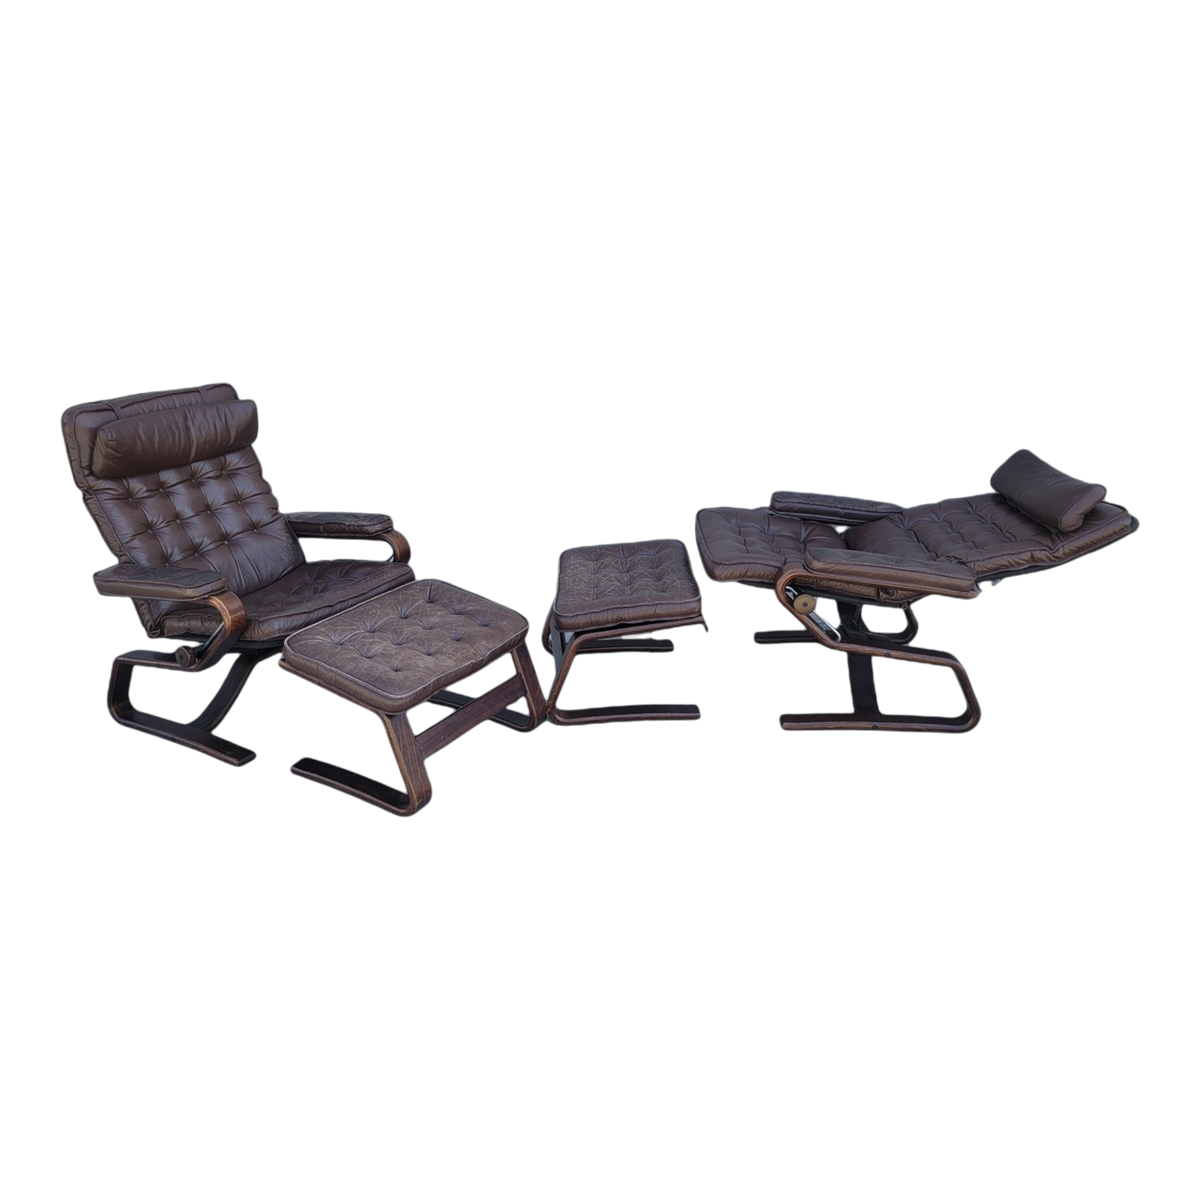 BELT Lounge Chair in Reclaimed Teak and Black Leather